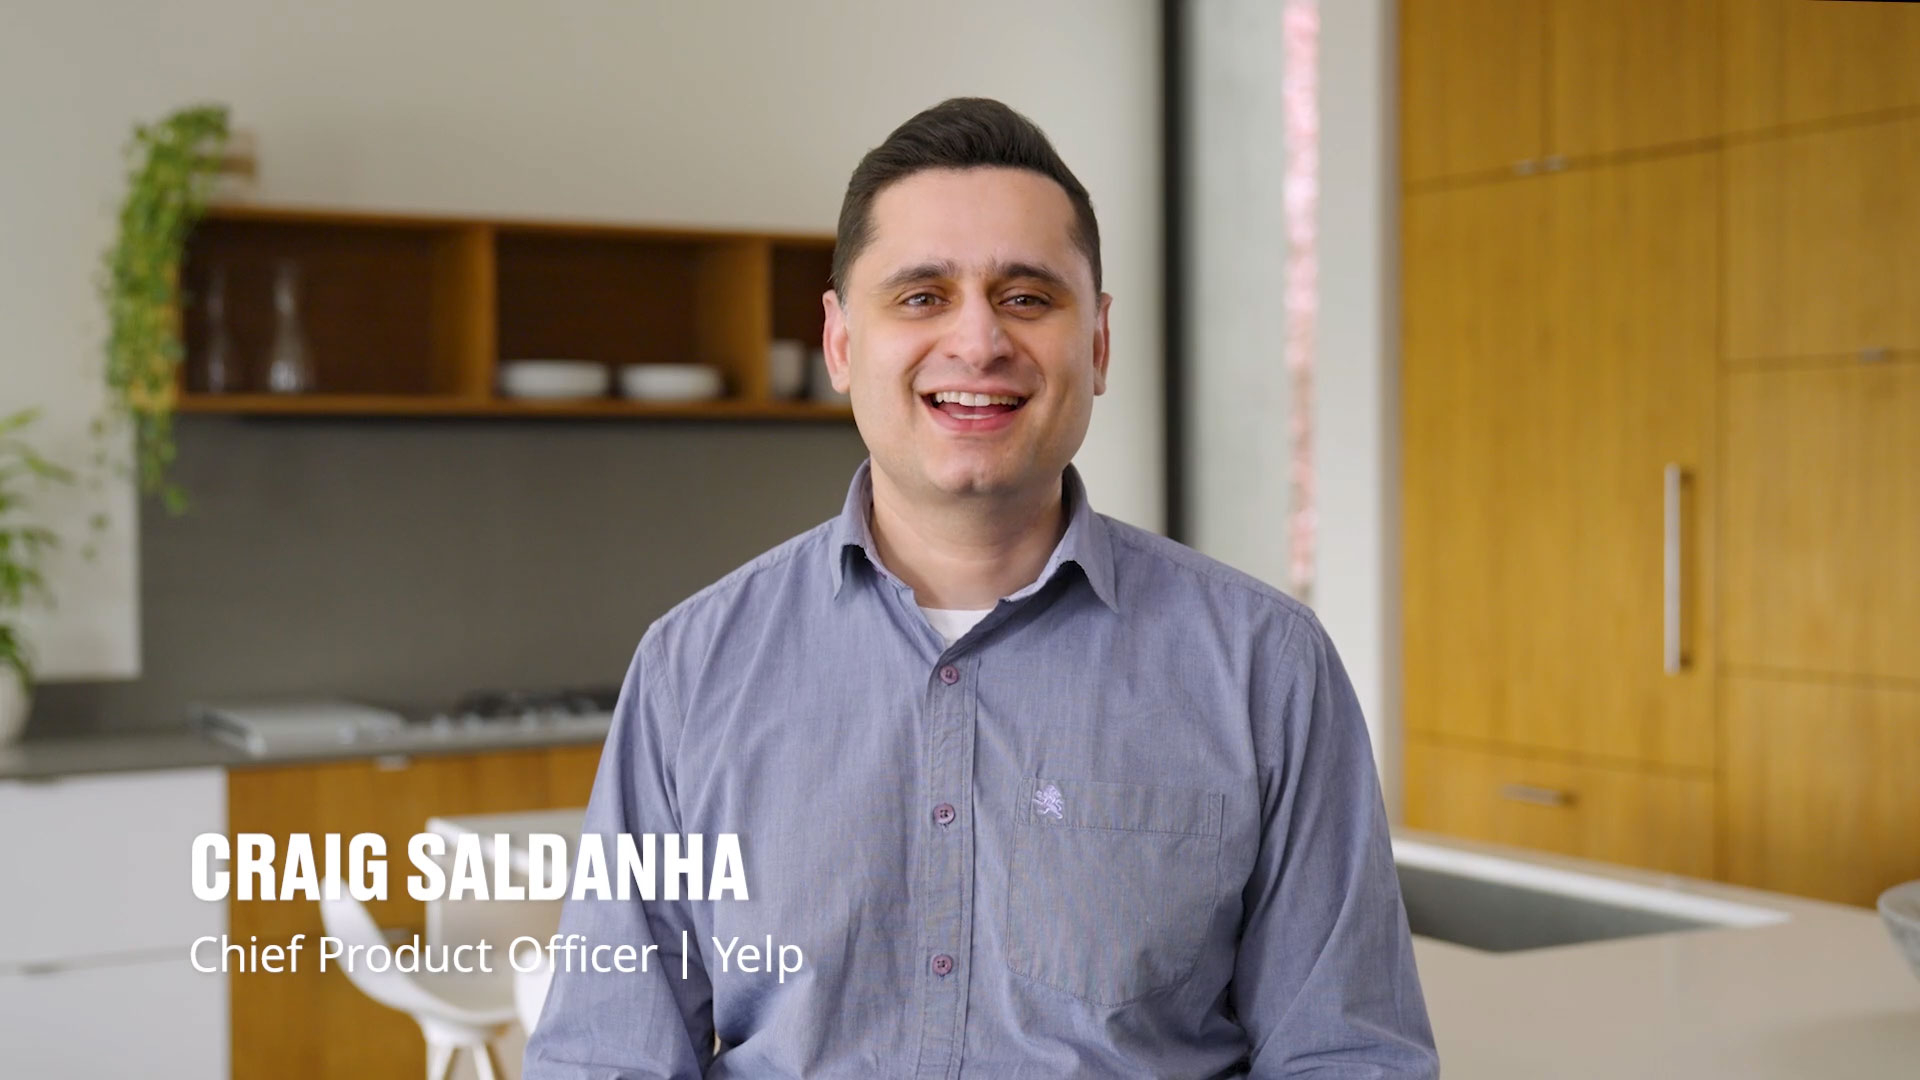 Yelp product chief Craig Saldanha, highlights the company’s Spring Product Release with more than 15 updates, including AI-powered features.